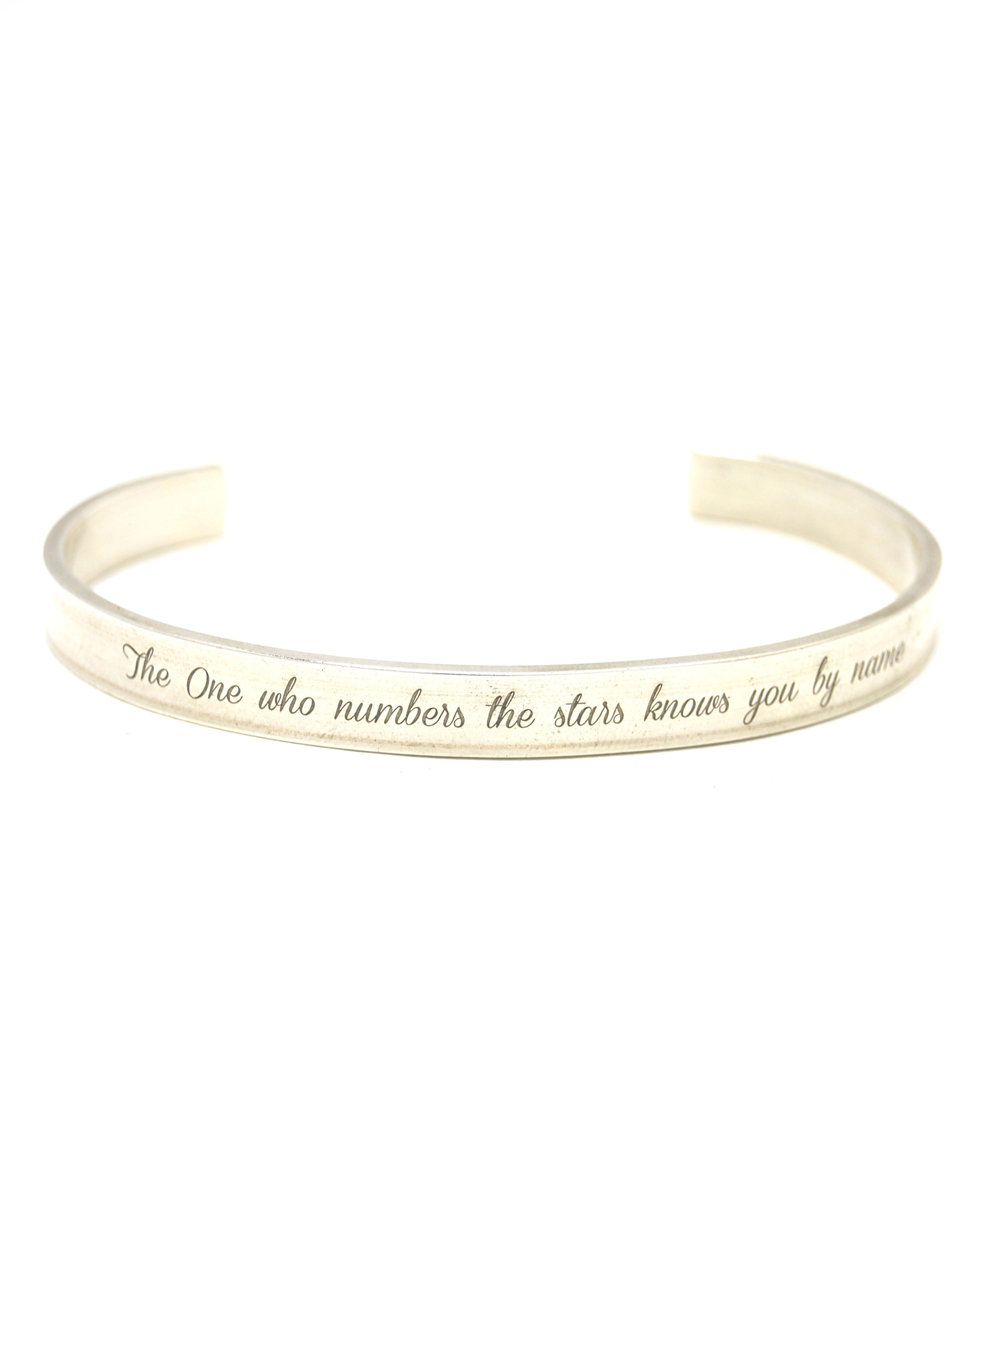 silver bracelet, sterling silver bracelet, sterling silver cuff, silver cuff, silver quote cuff, silver quote bracelet, quote bracelet, quote cuff, the one who number the stars knows you by name